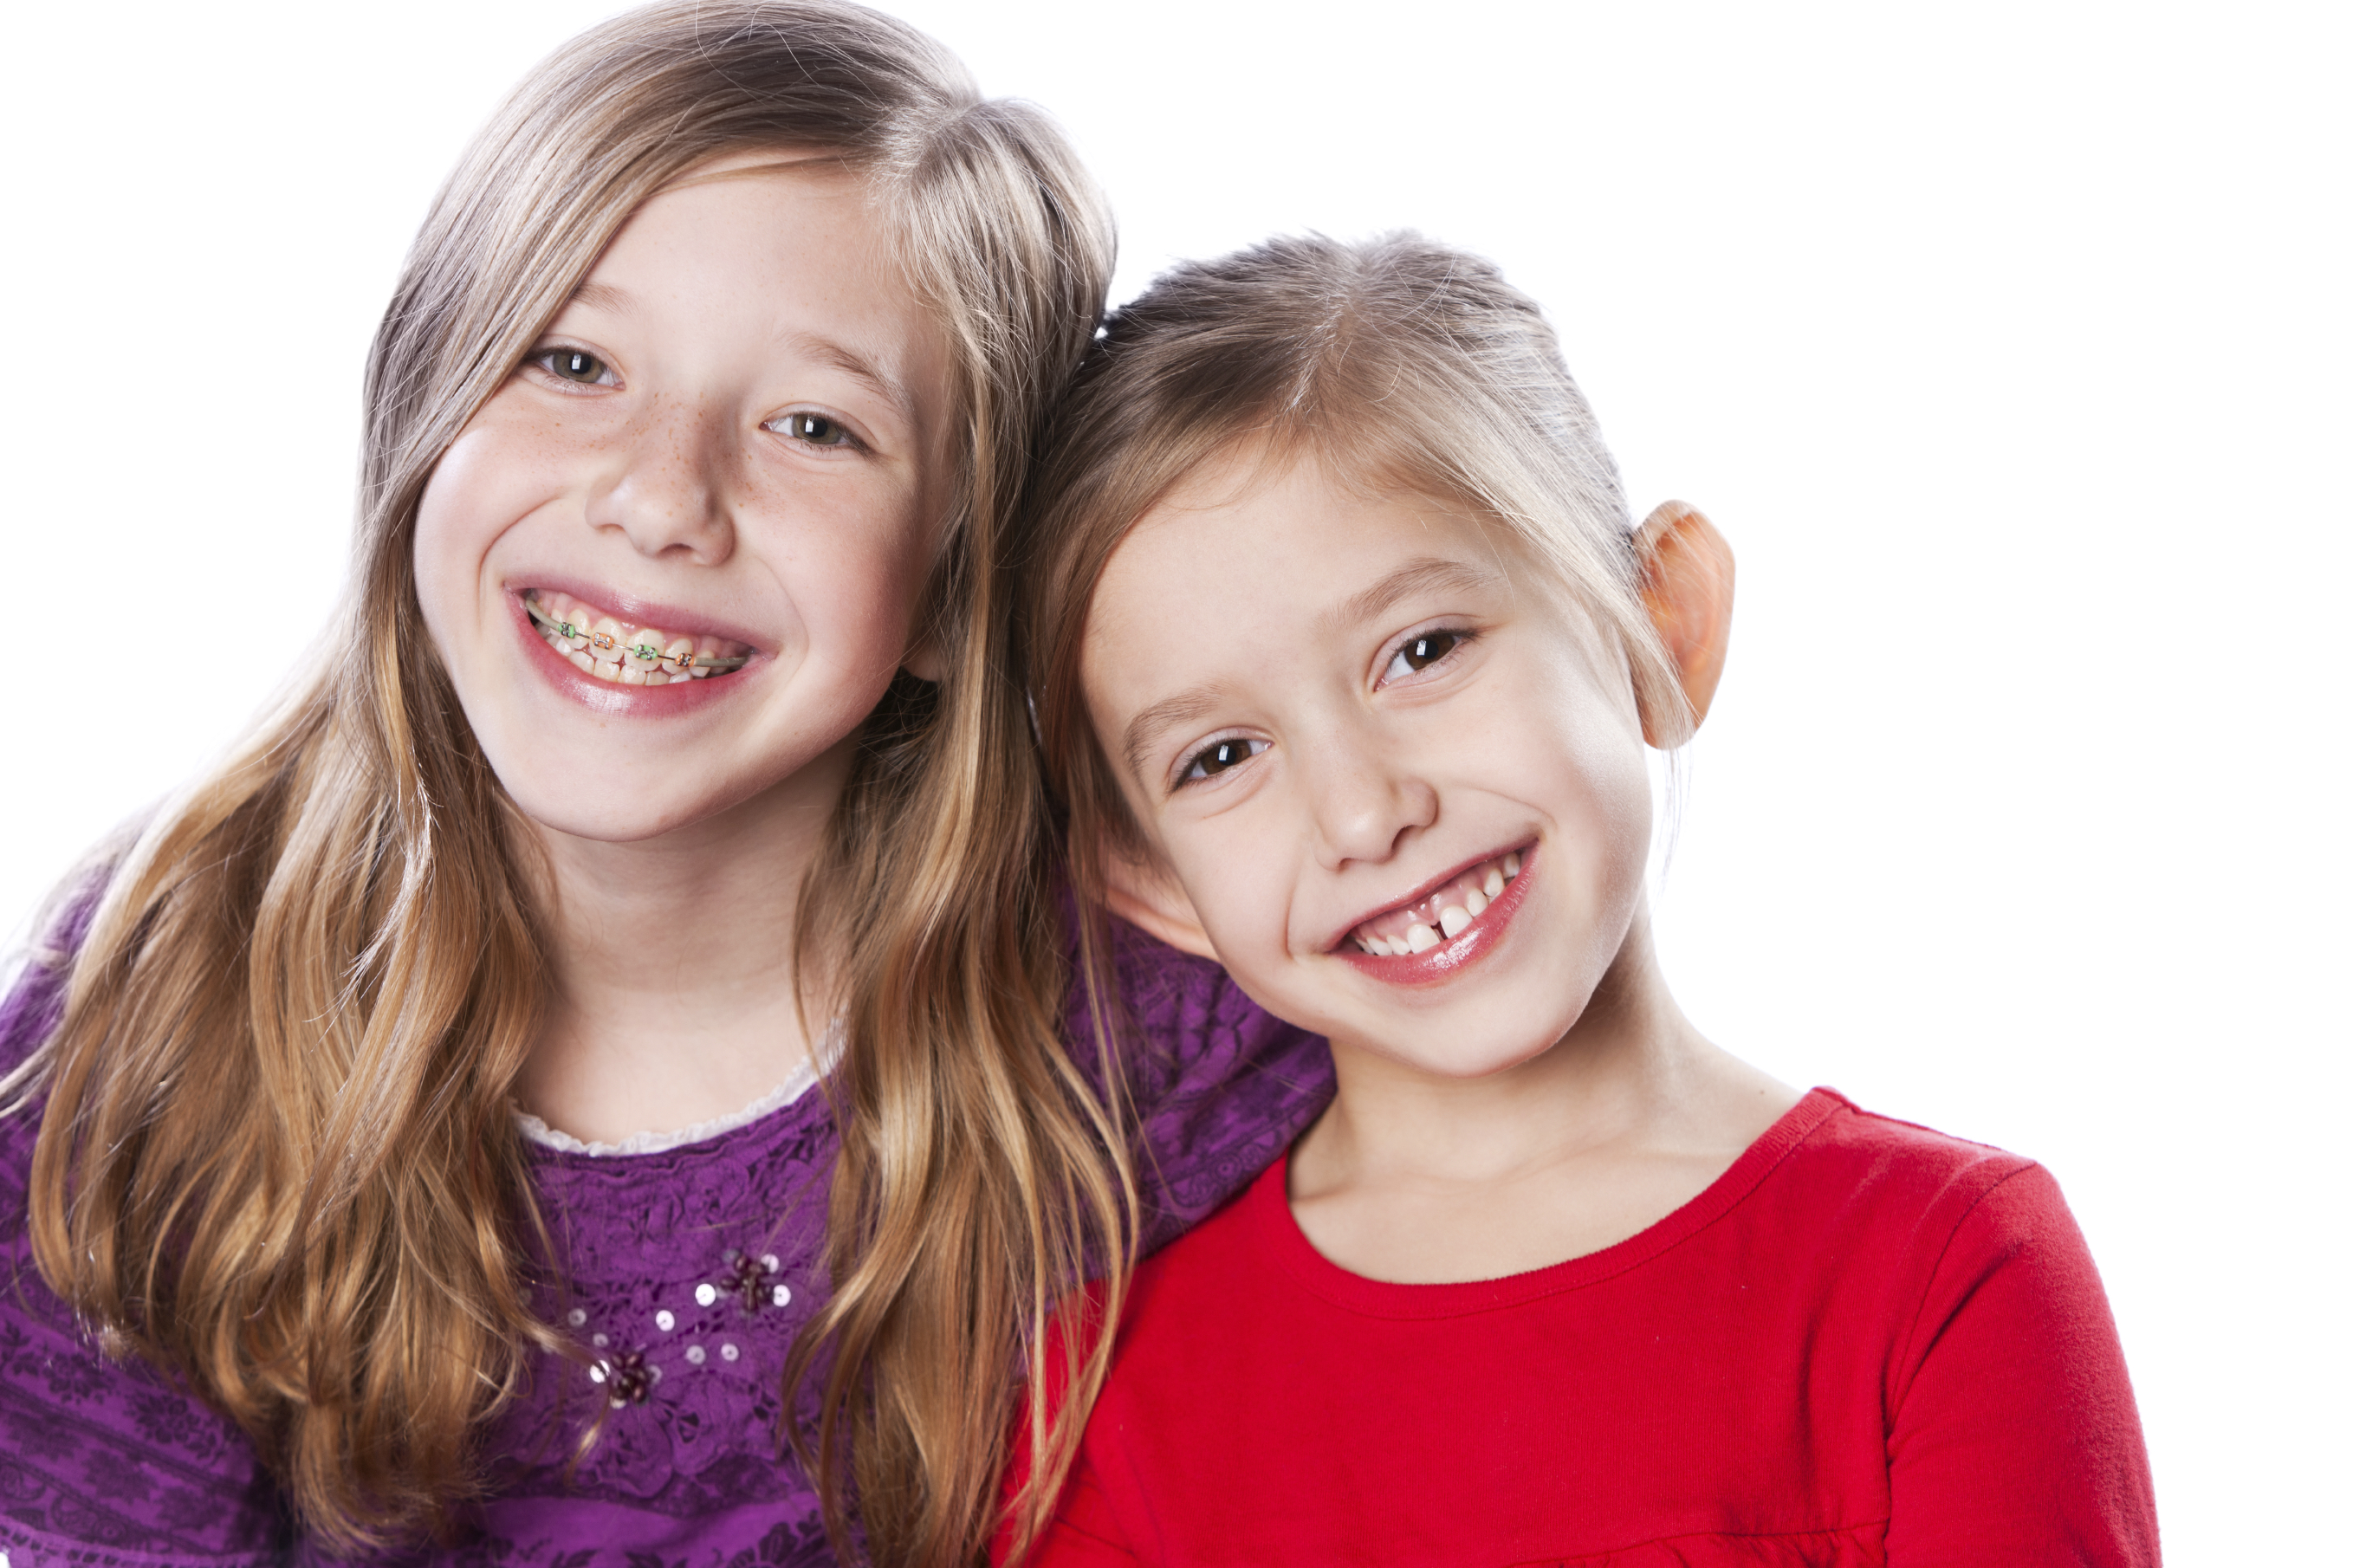 Ask Your Forney Dentist: When is the Right Time to Screen My Children for Their Orthodontic Needs?